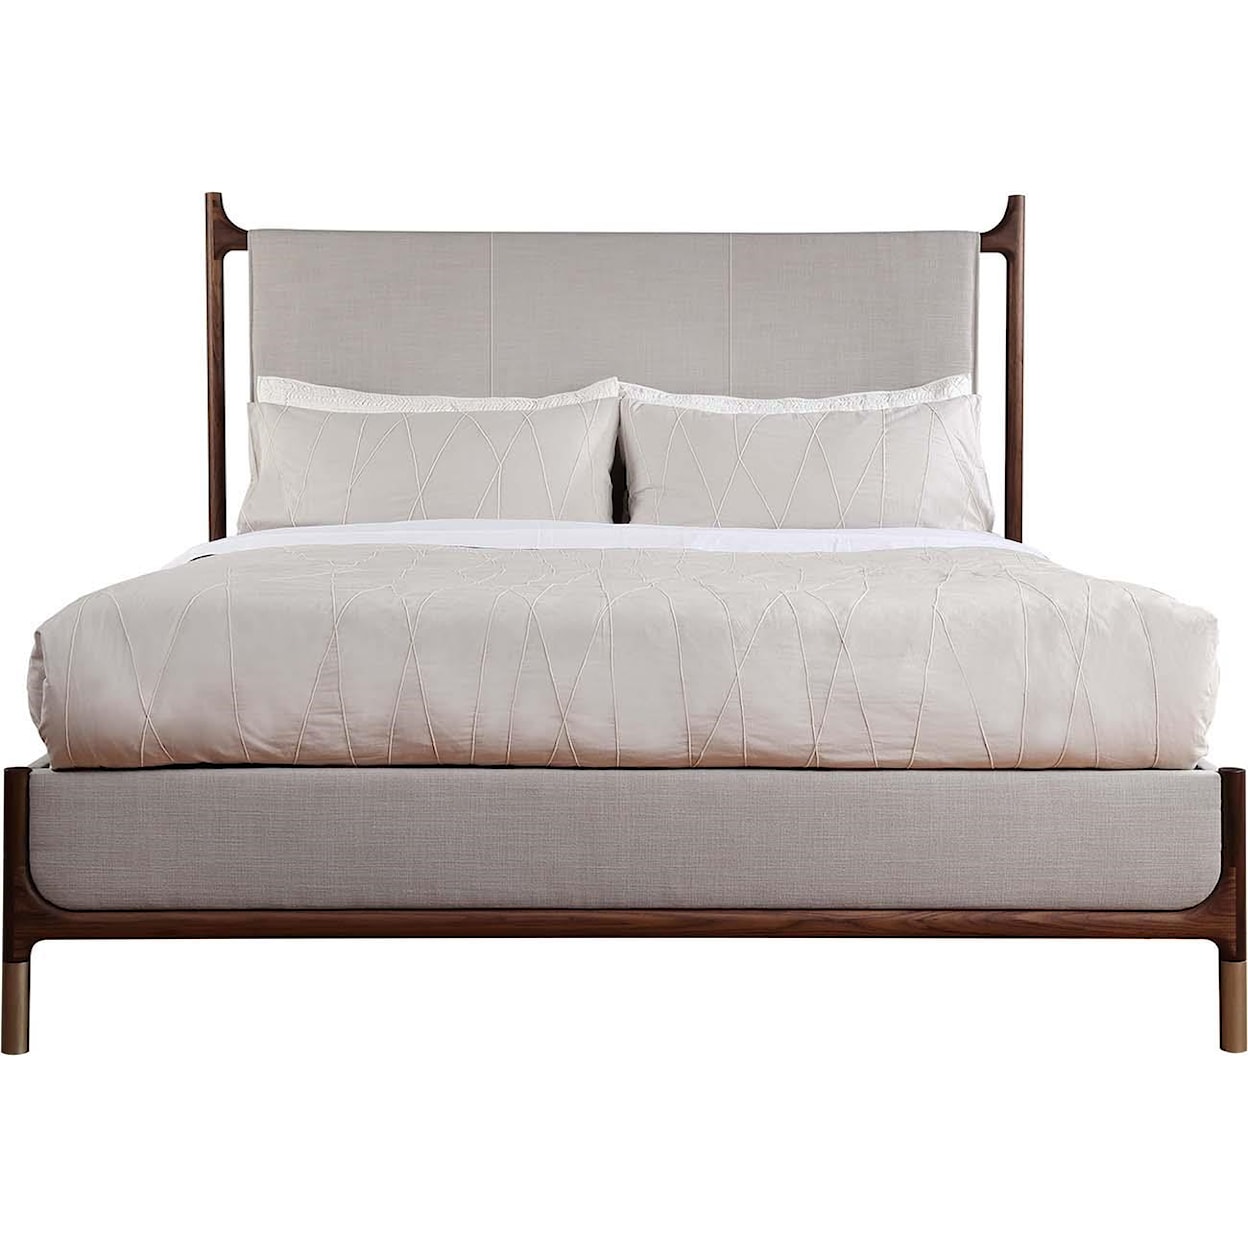 Stickley Walnut Grove King Crypton Fabric Upholstered Bed